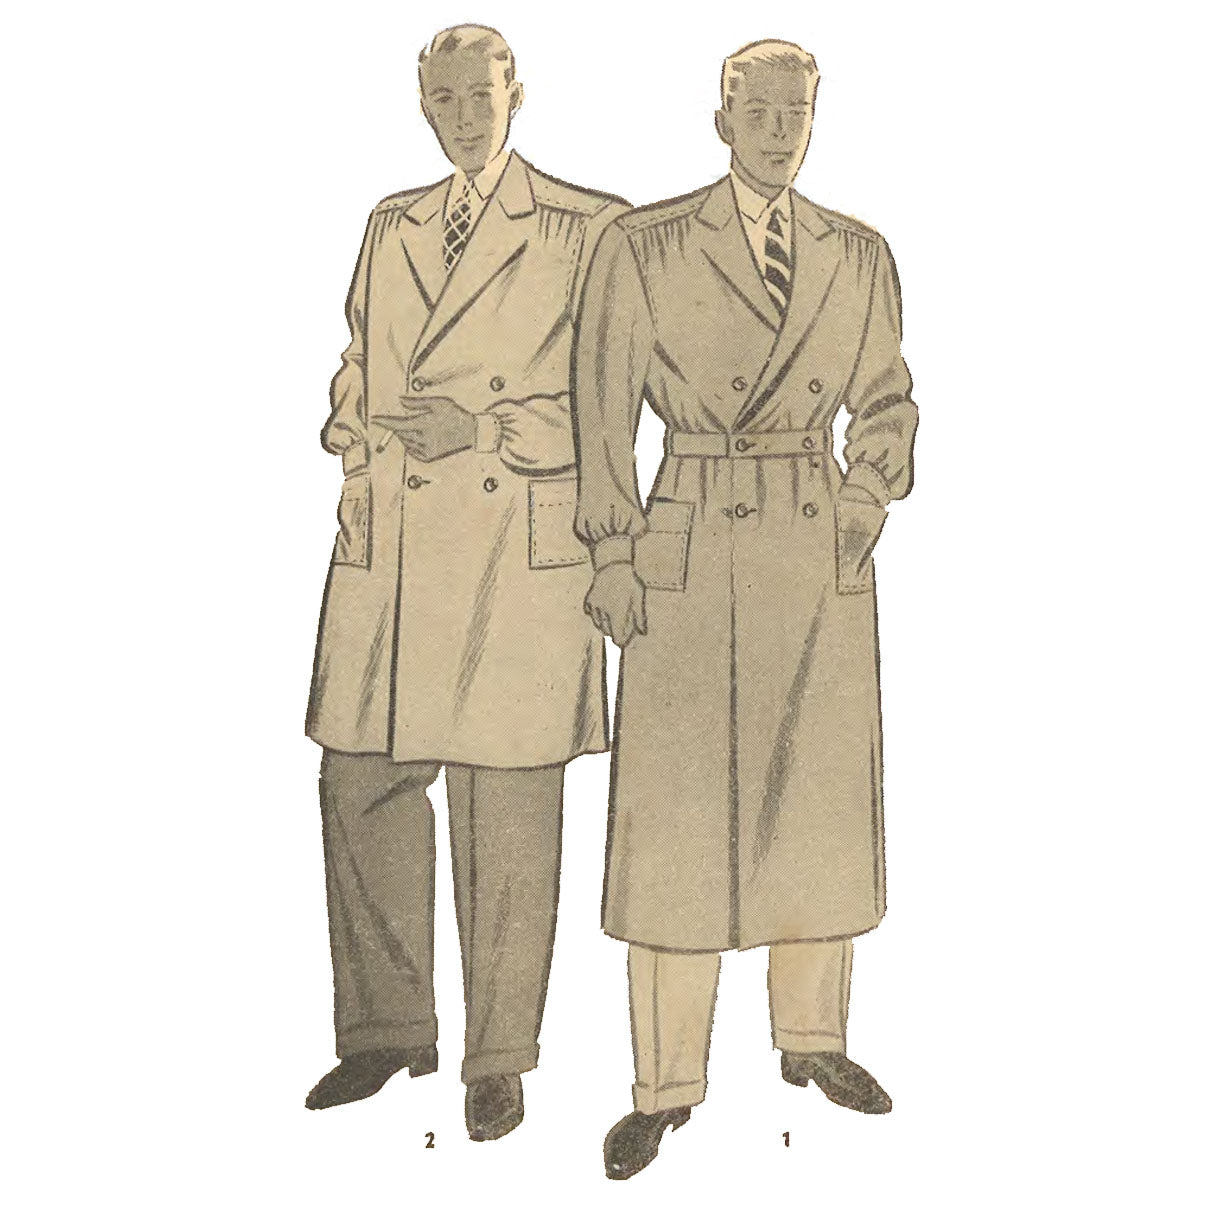 Two men wearing two versions of the coat sewing pattern. One is loose with longsleeves and cuffs, notched collar, shoulder yokes with gatheres to front of coat at shoulder, 2 patch pocjets and double breasted fastening. The second man is wearing the same coat in a longer calf length variation with buttoning belt-like waistband.